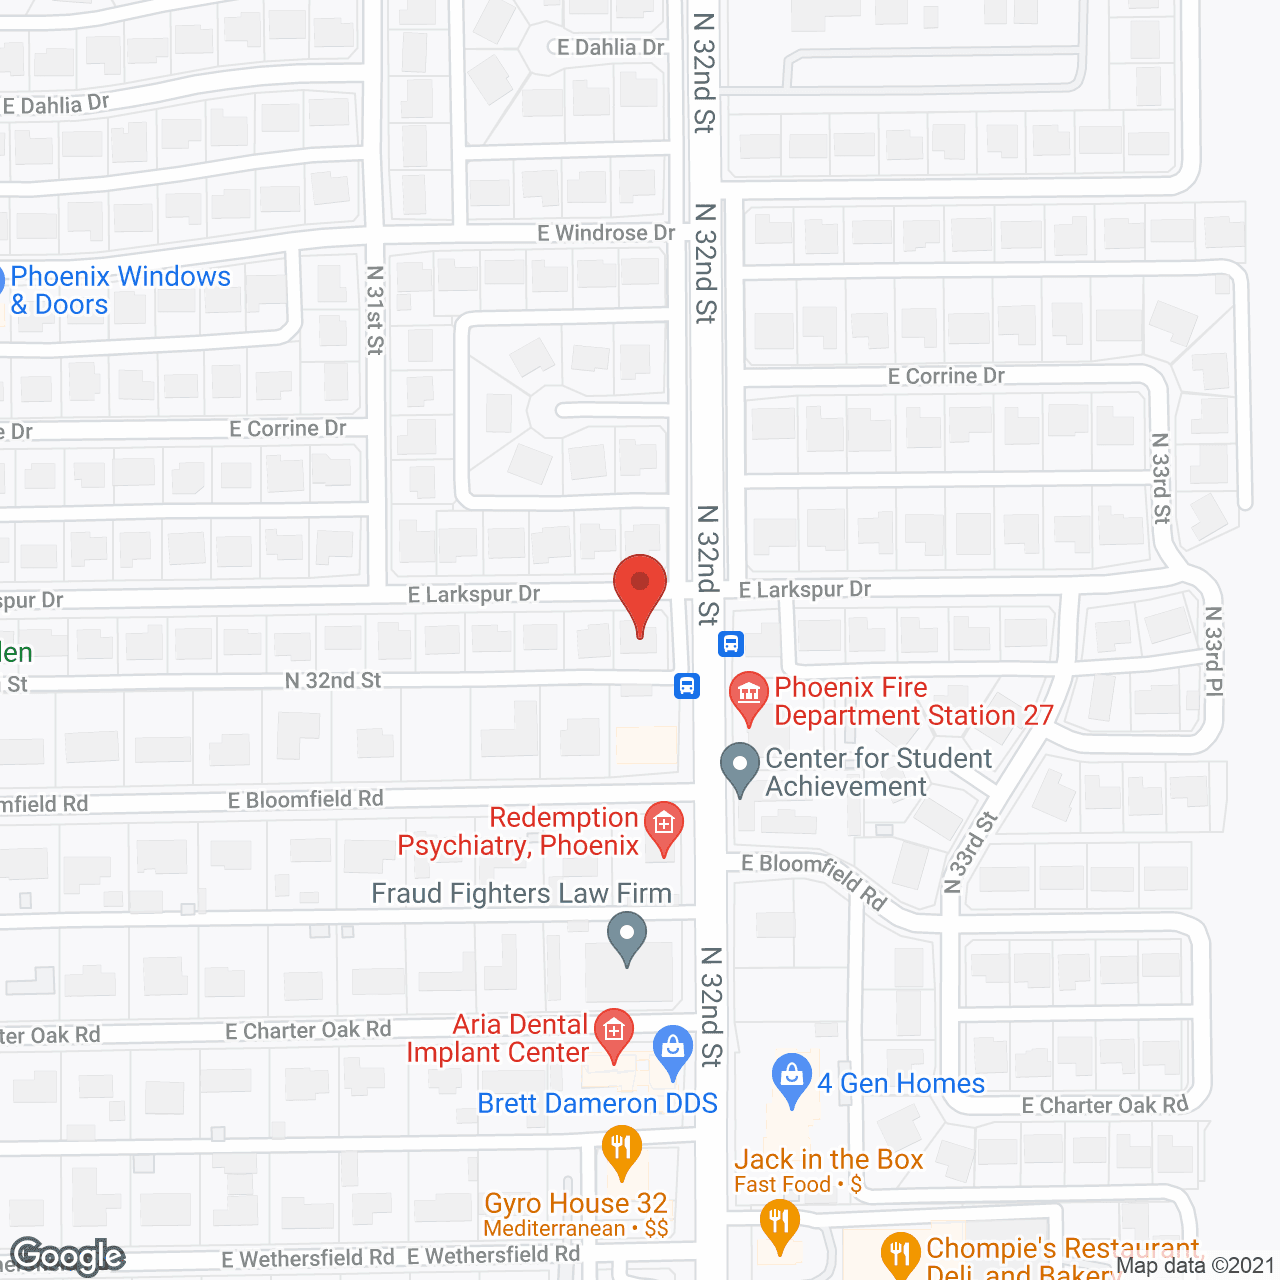 Footsteps Assisted Living Care Home in google map